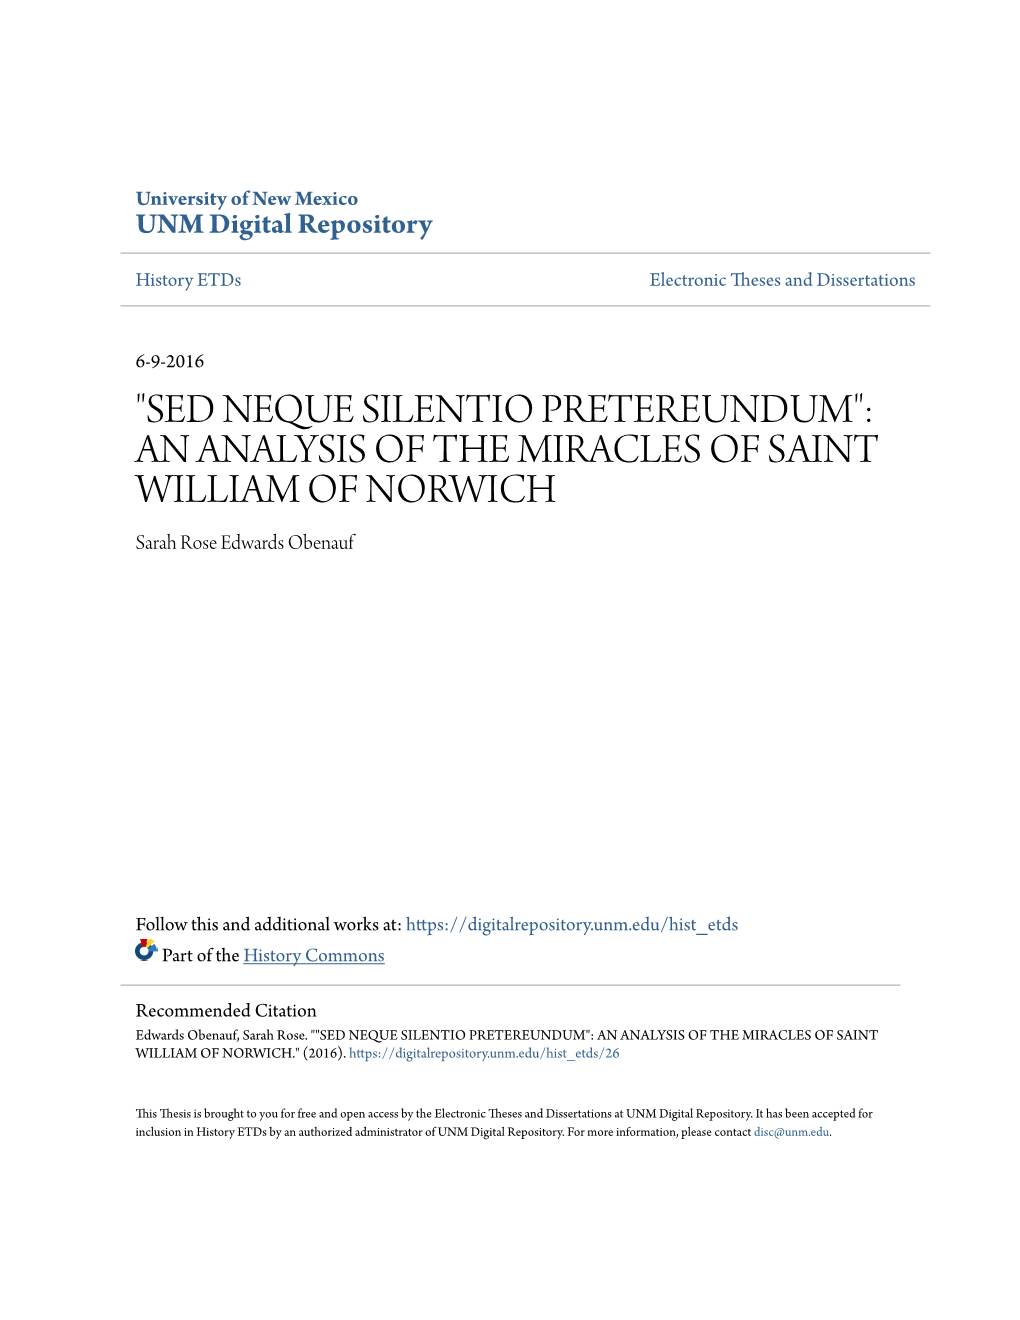 AN ANALYSIS of the MIRACLES of SAINT WILLIAM of NORWICH Sarah Rose Edwards Obenauf